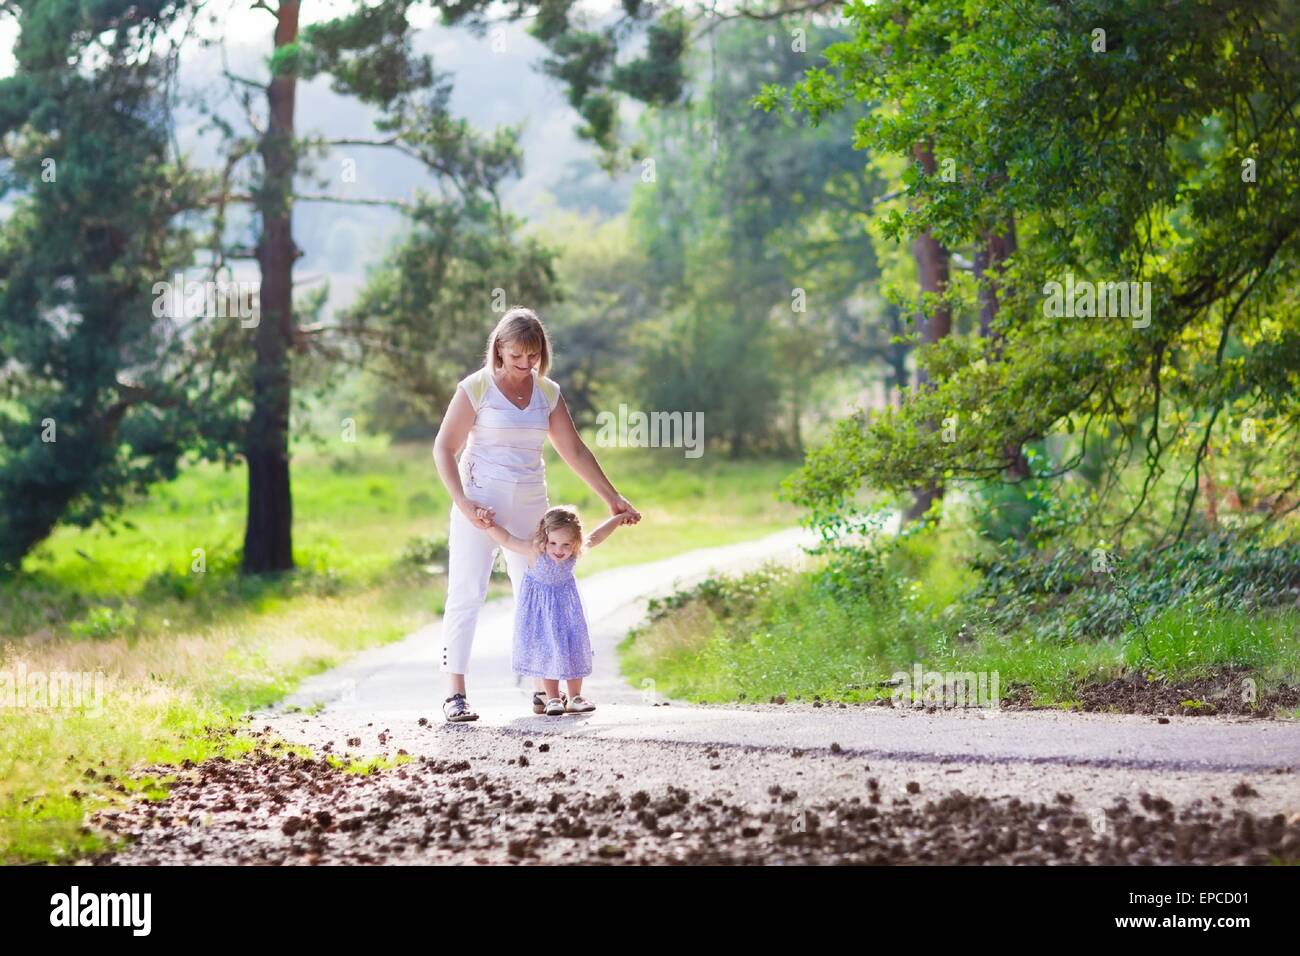 Happy active woman playing with a cute little child, adorable toddler girl in blue dress, having fun together enjoying hiking Stock Photo